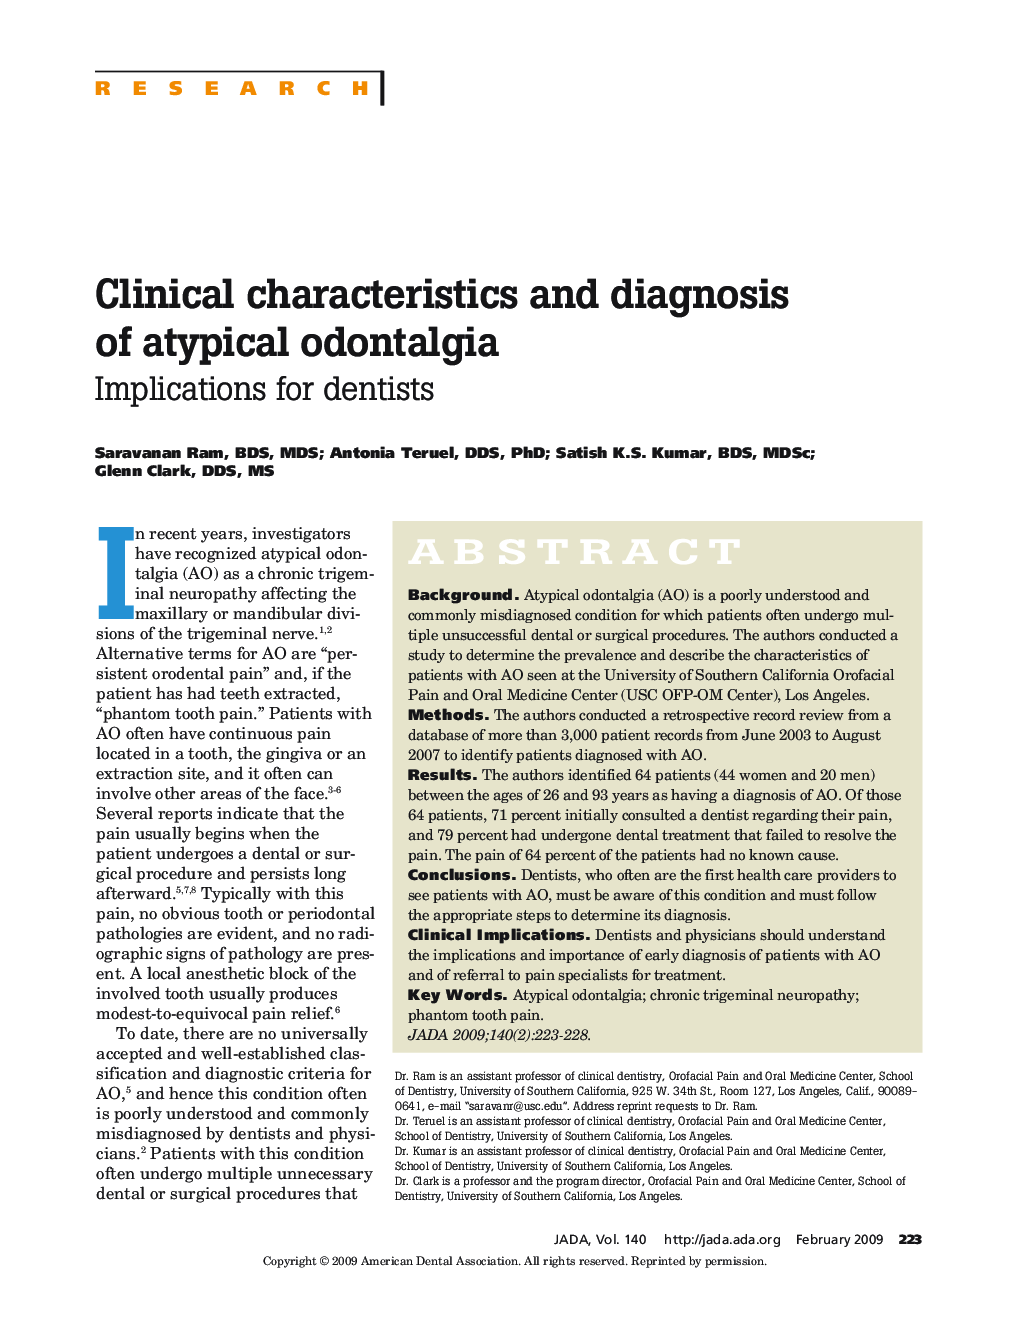 Clinical characteristics and diagnosis of atypical odontalgia